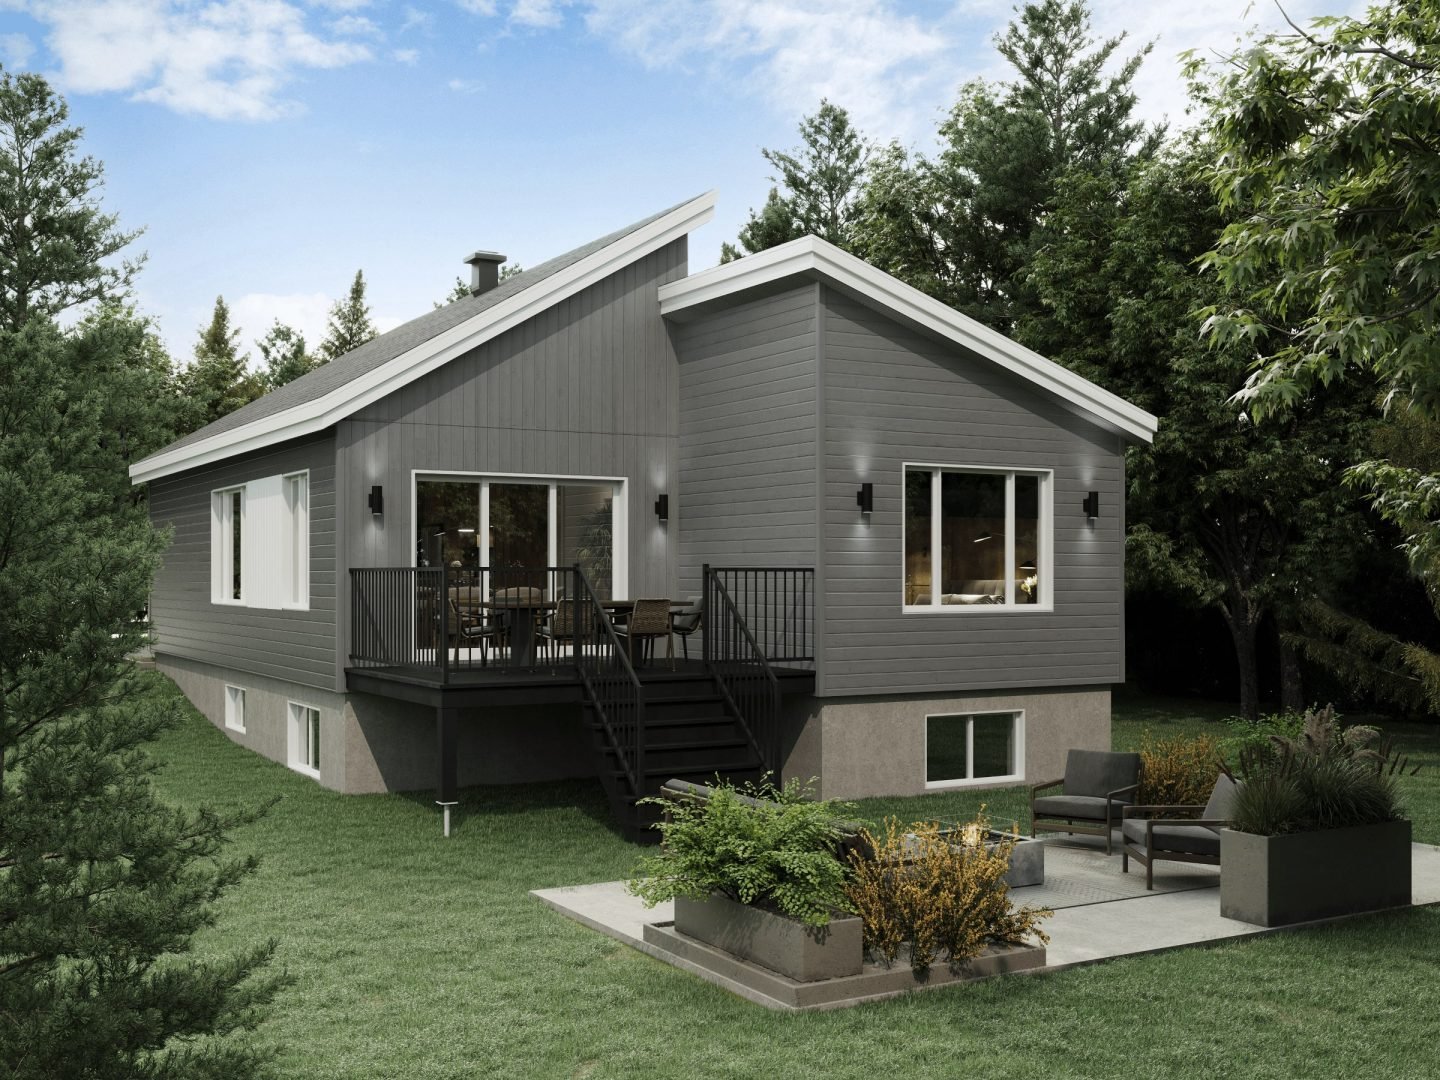 The Svalla model is a midcentury-style chalet. Exterior rear view.